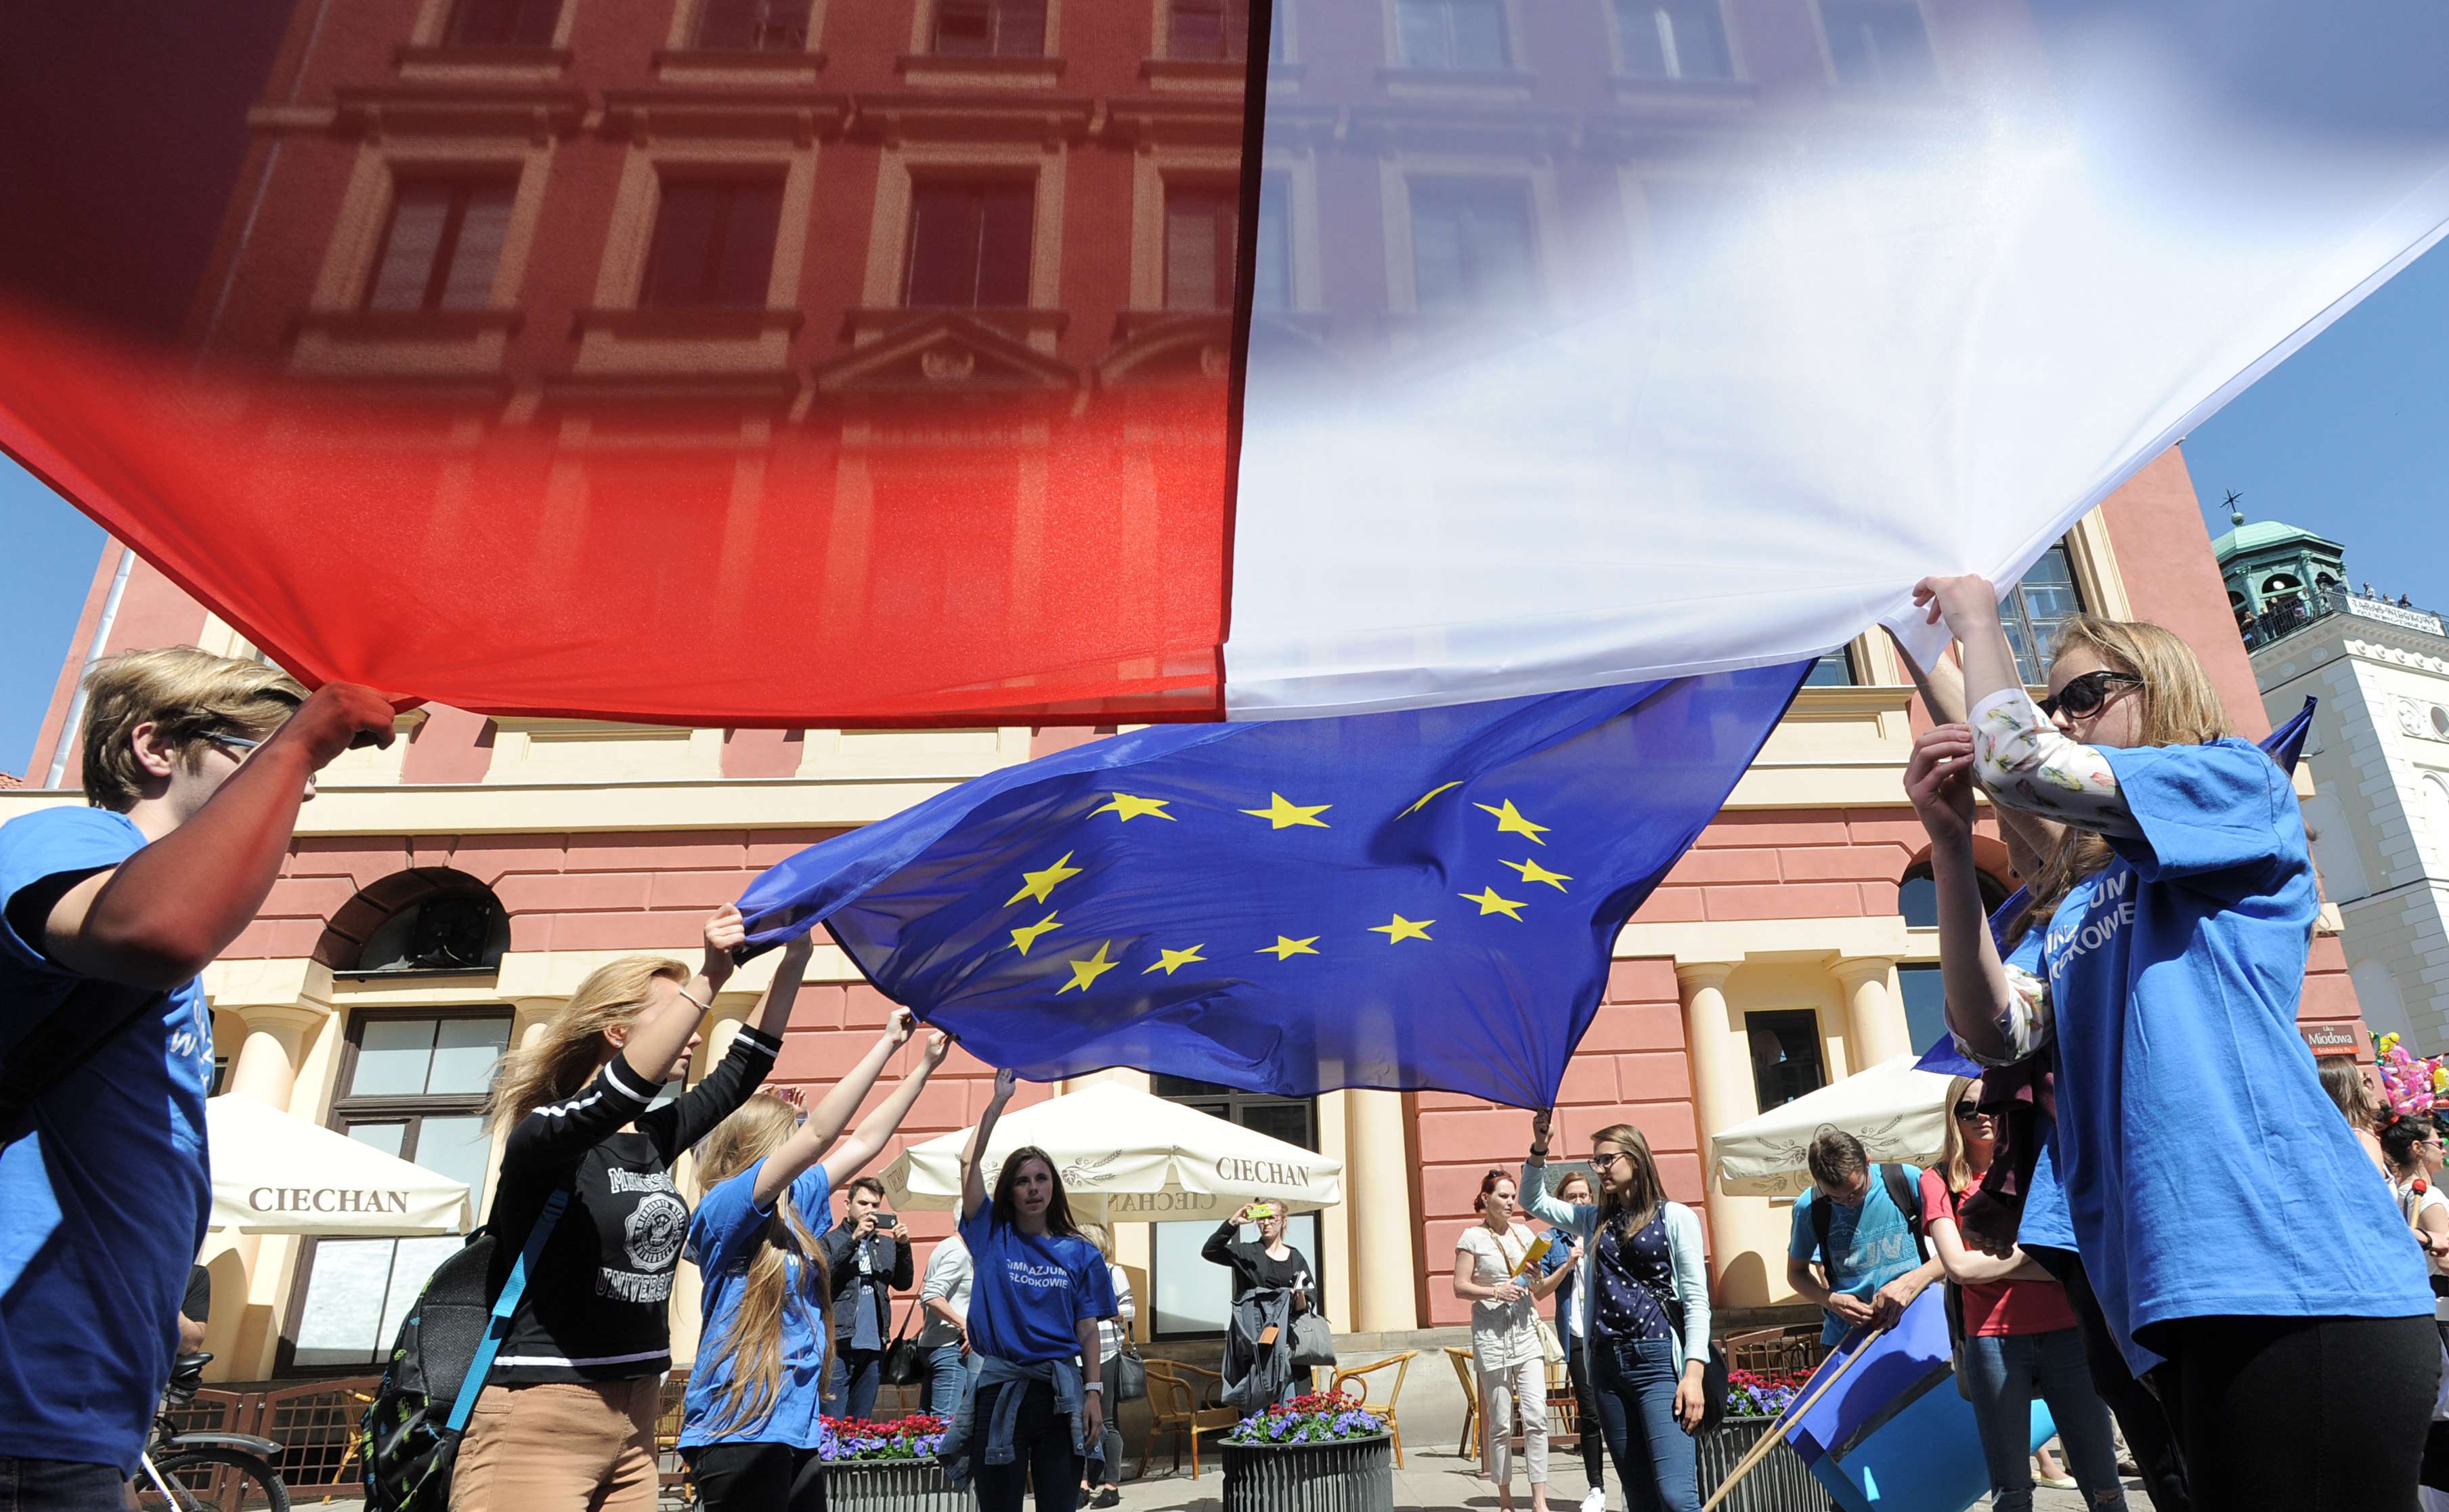 Young people in Warsaw wave the Polish and European Union flags during the yearly Schumann Parade supporting EU ideas. Photo: AP